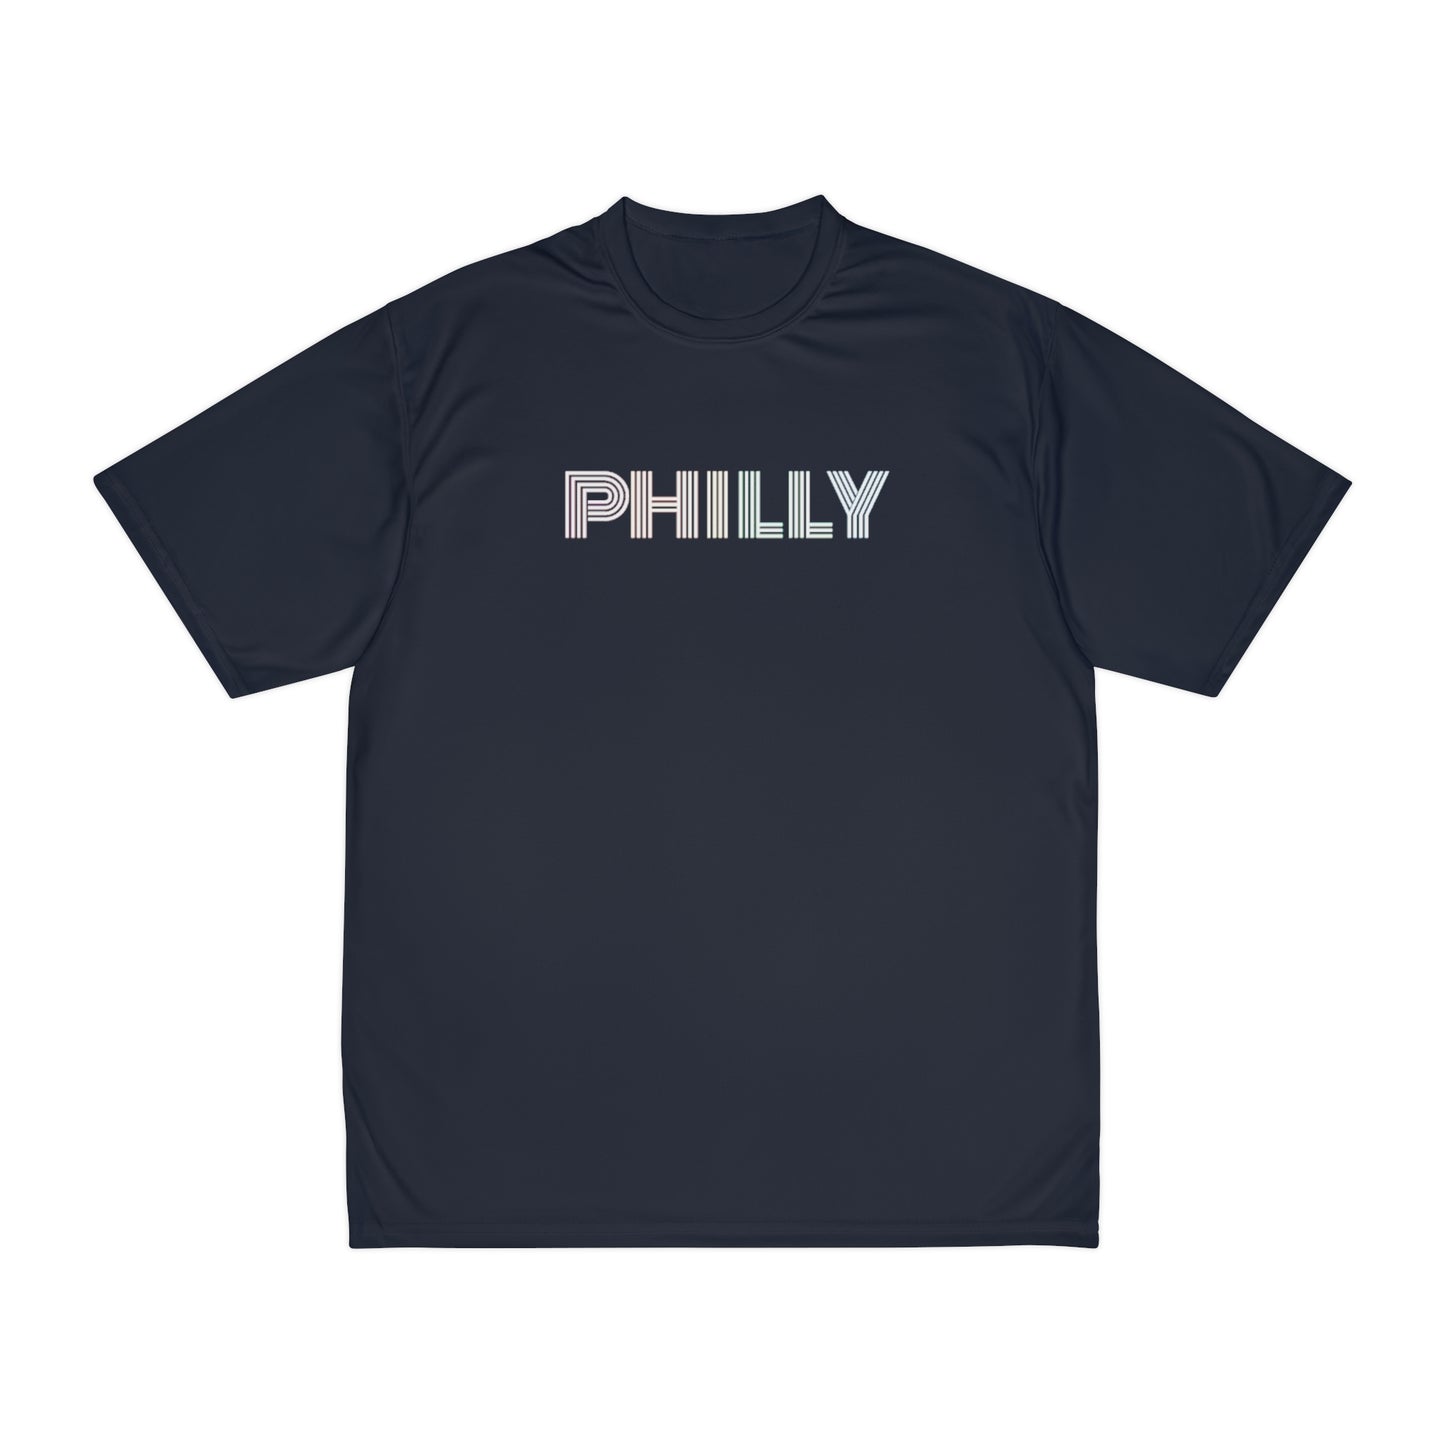 PHILLY Men's Performance T-Shirt